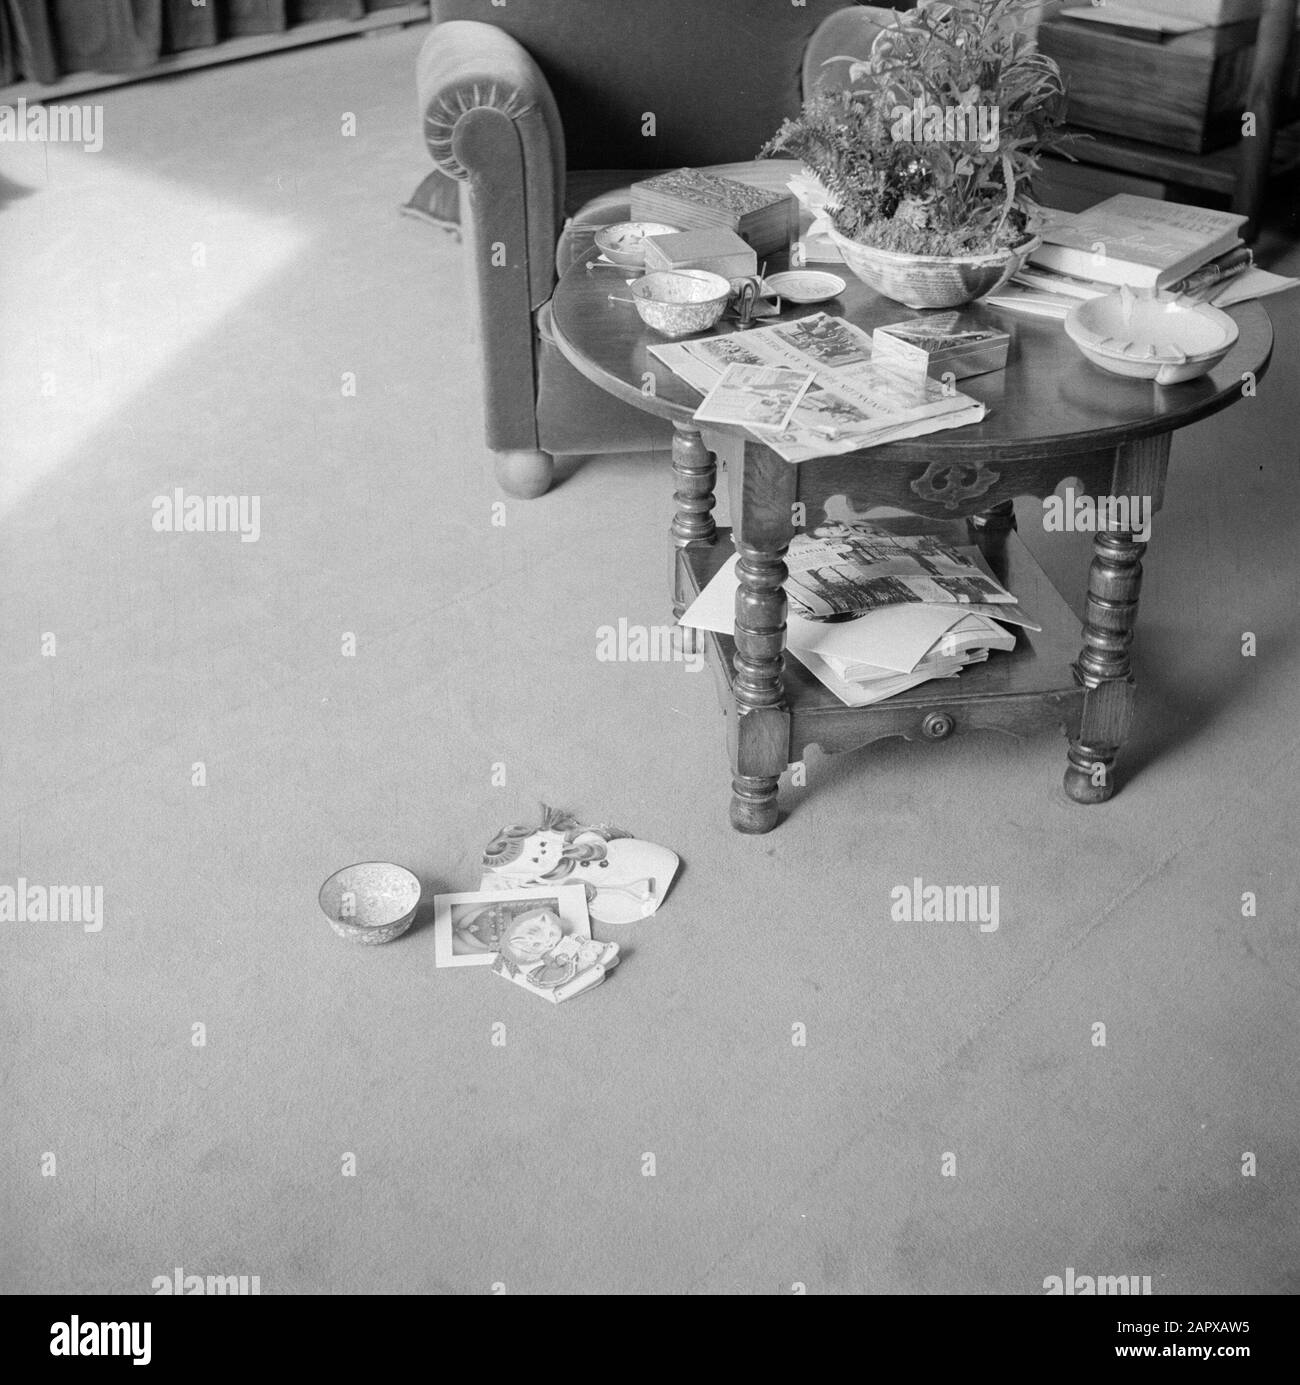 The royal family at palace Soestdijk  Coffee table with books and newspapers and armchair in the study of Princess Juliana Date: ca. 1947 Location: Baarn, Utrecht (province) Keywords: ashtraks, books, cookie drums, royal house, newspapers, plants, cigarette boxes, tables Stock Photo